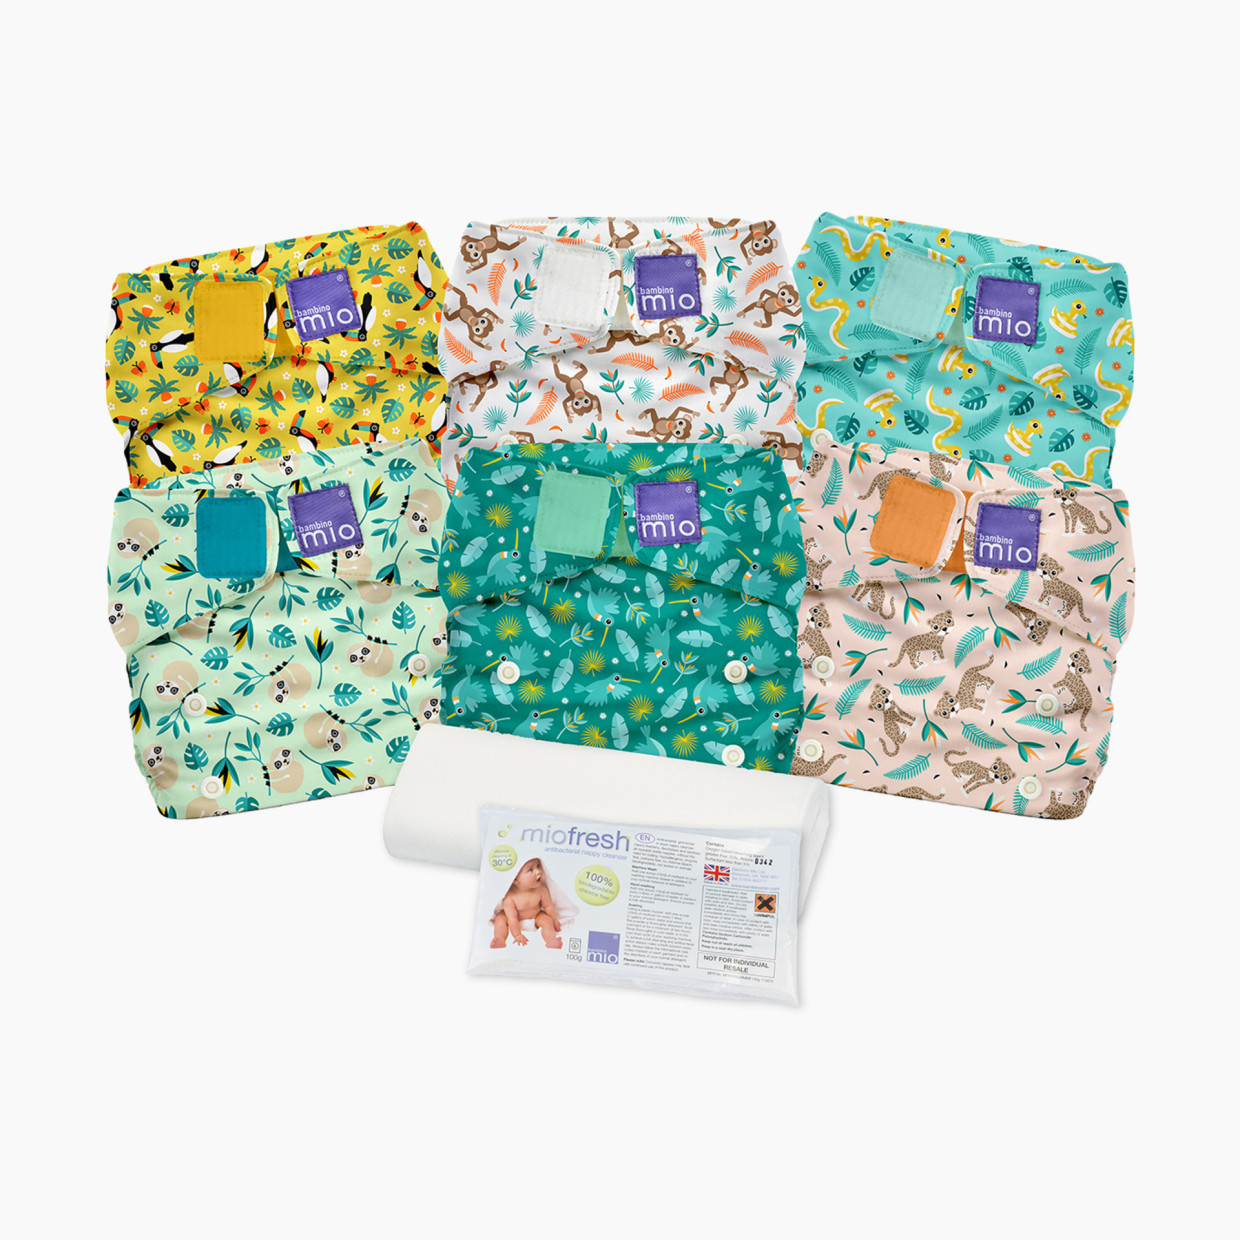 Bambino Mio Miosolo All-In-One Reusable Cloth Diaper Set (6 Pack) - Rainforest.